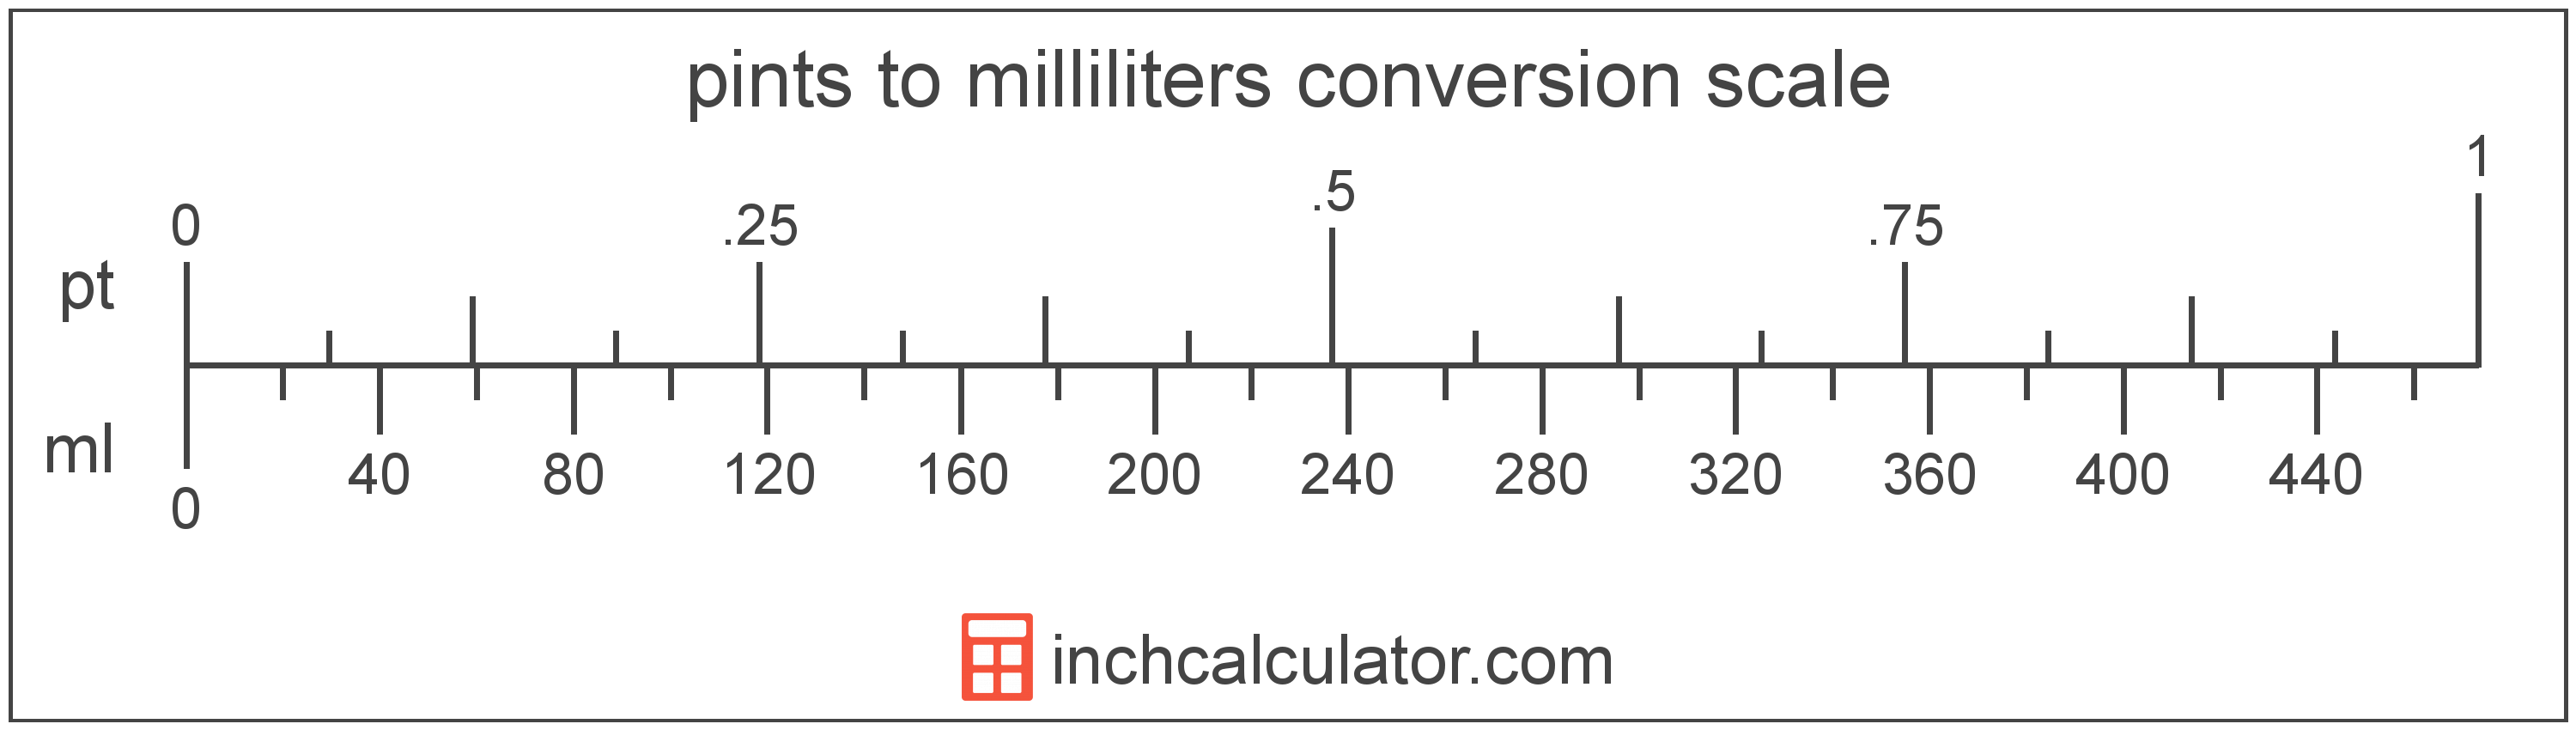 conversion scale showing milliliters and equivalent pints volume values